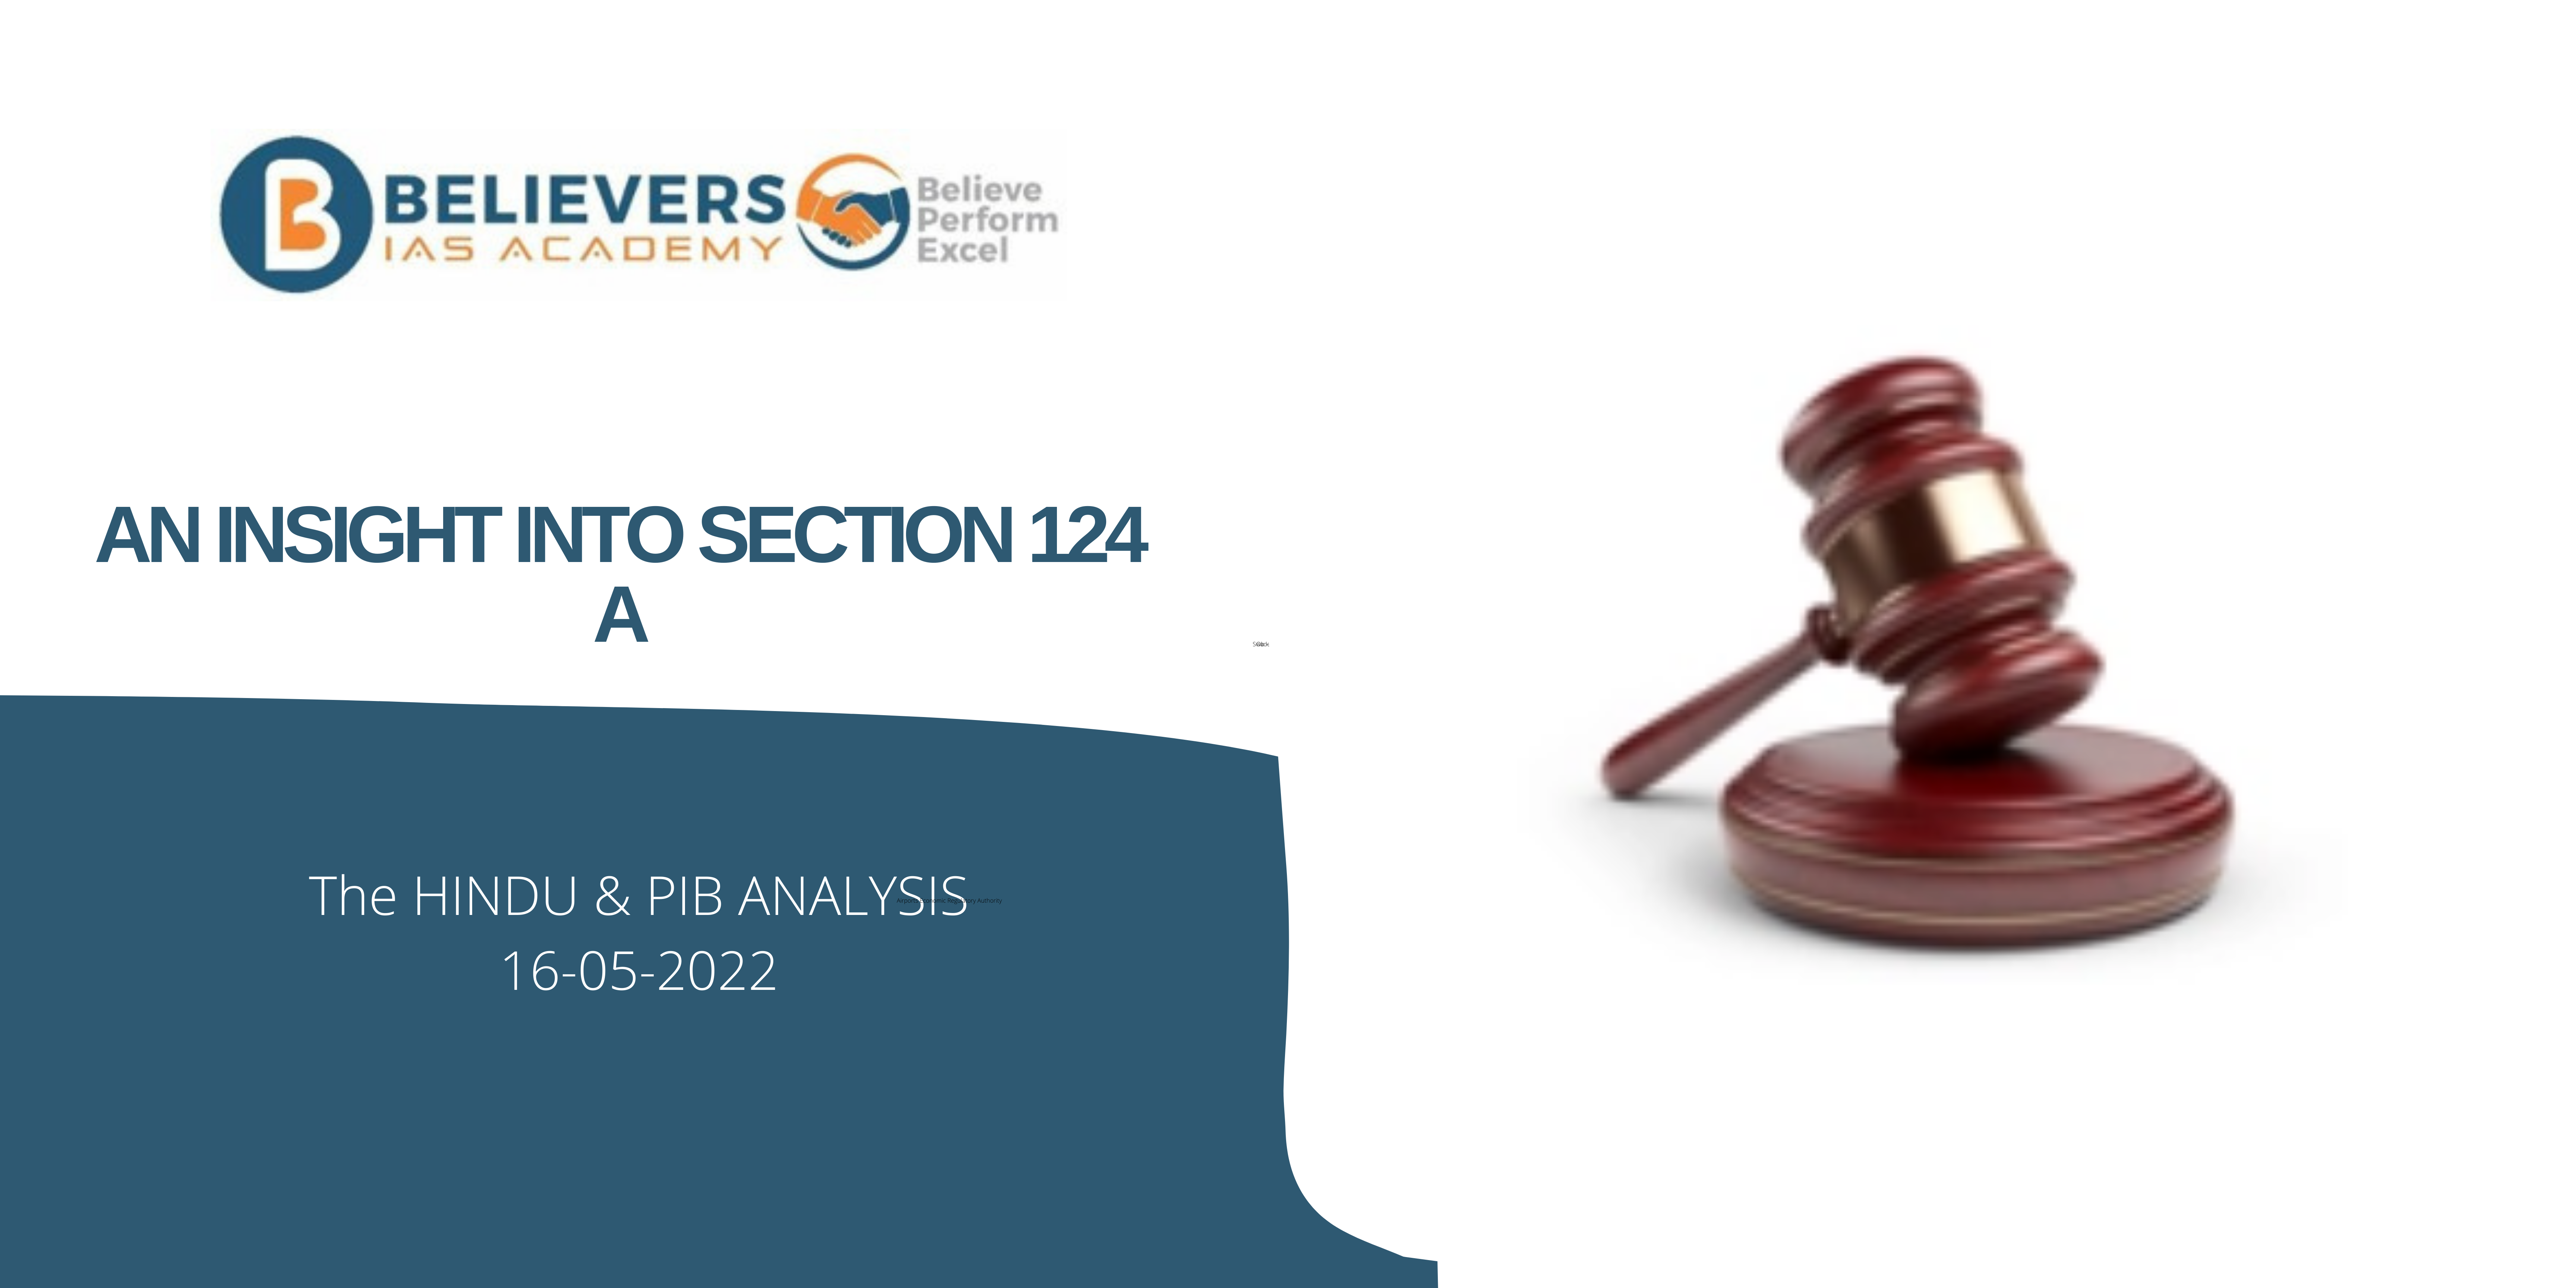 Civil services Current affairs - Section 124 A: Believer's Insight